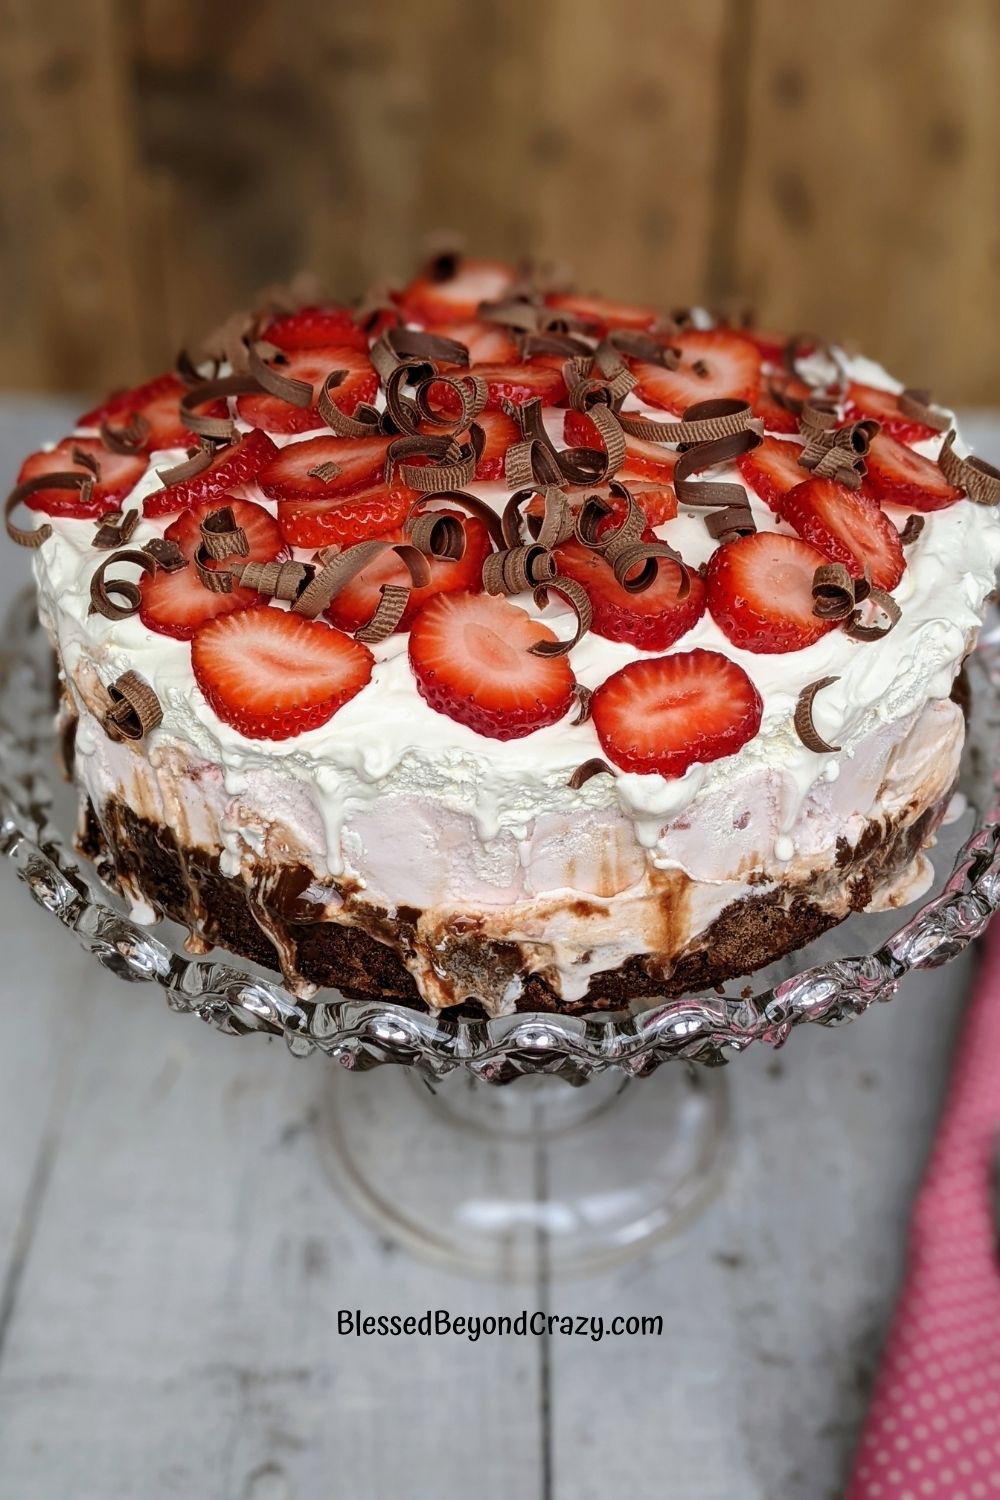 How to Make a Simple Strawberry Ice Cream Cake